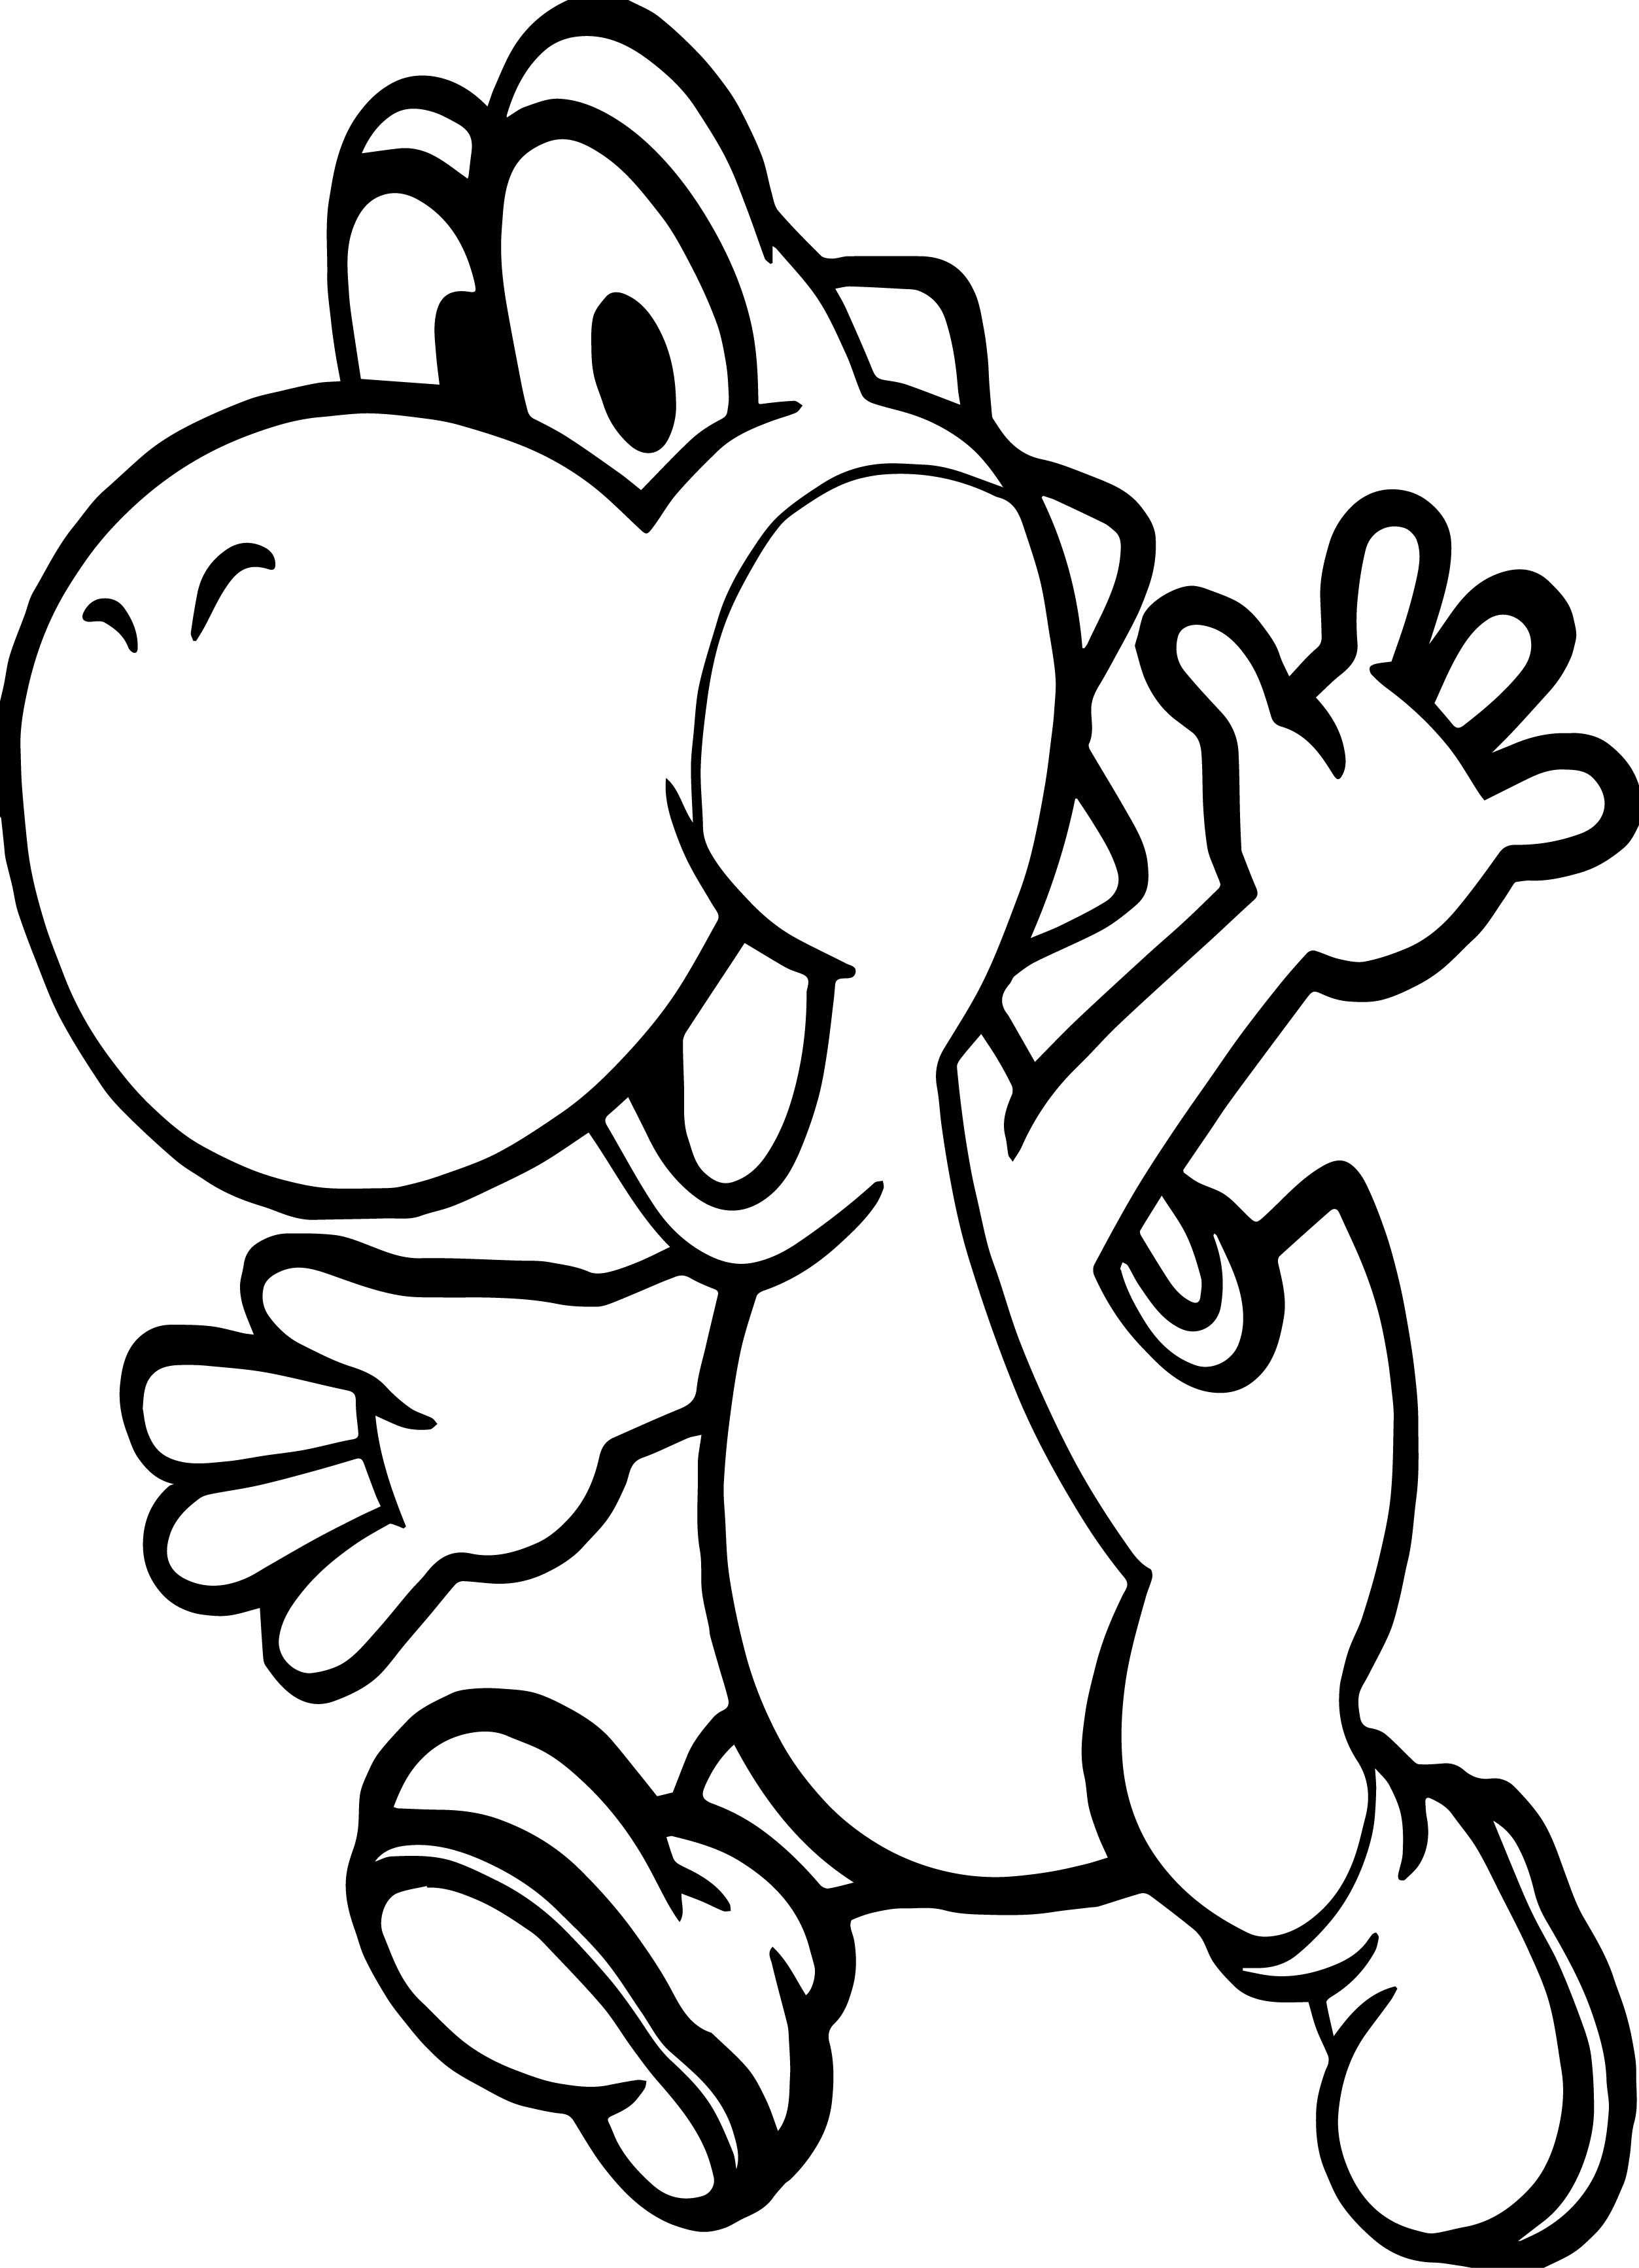 Yoshi Hello Coloring Page Coloring Pages Drawings Yoshi